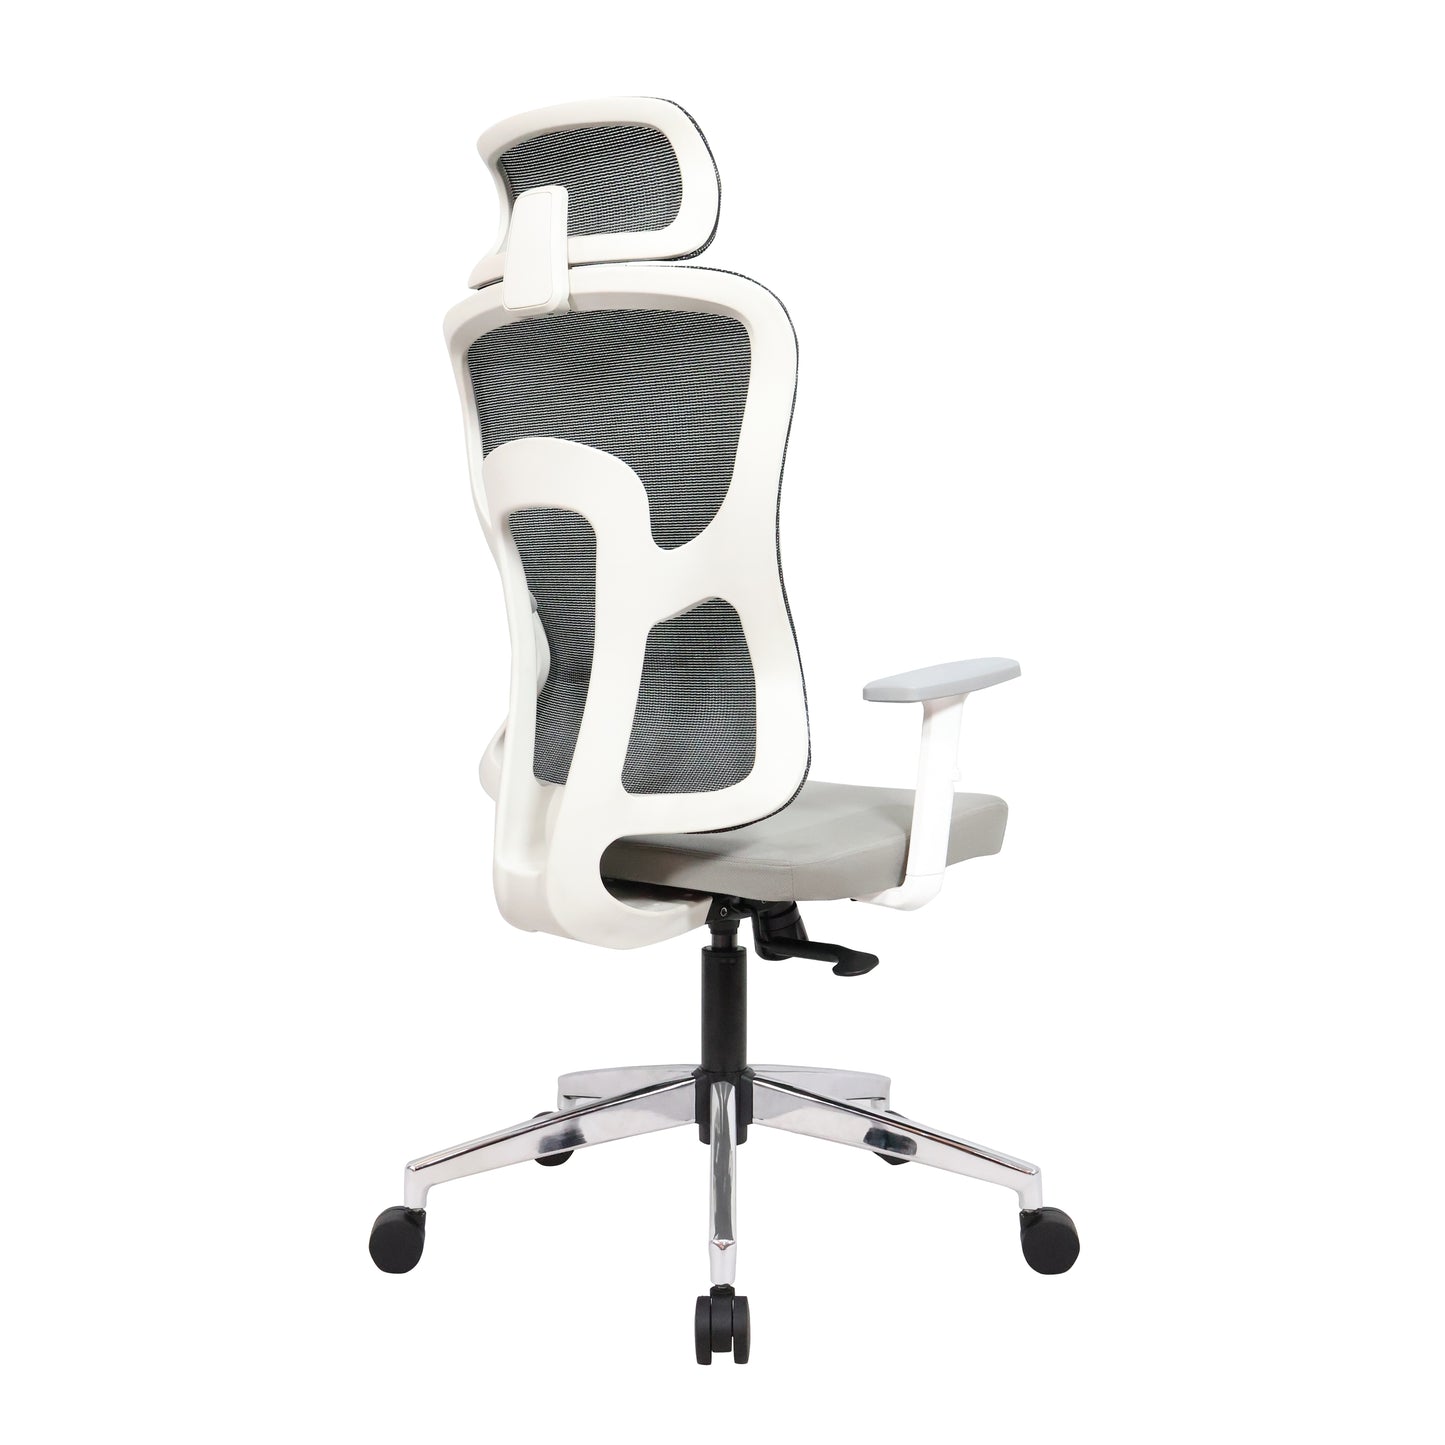 Lumbarc High Back Chair Executive Chairs - makemychairs